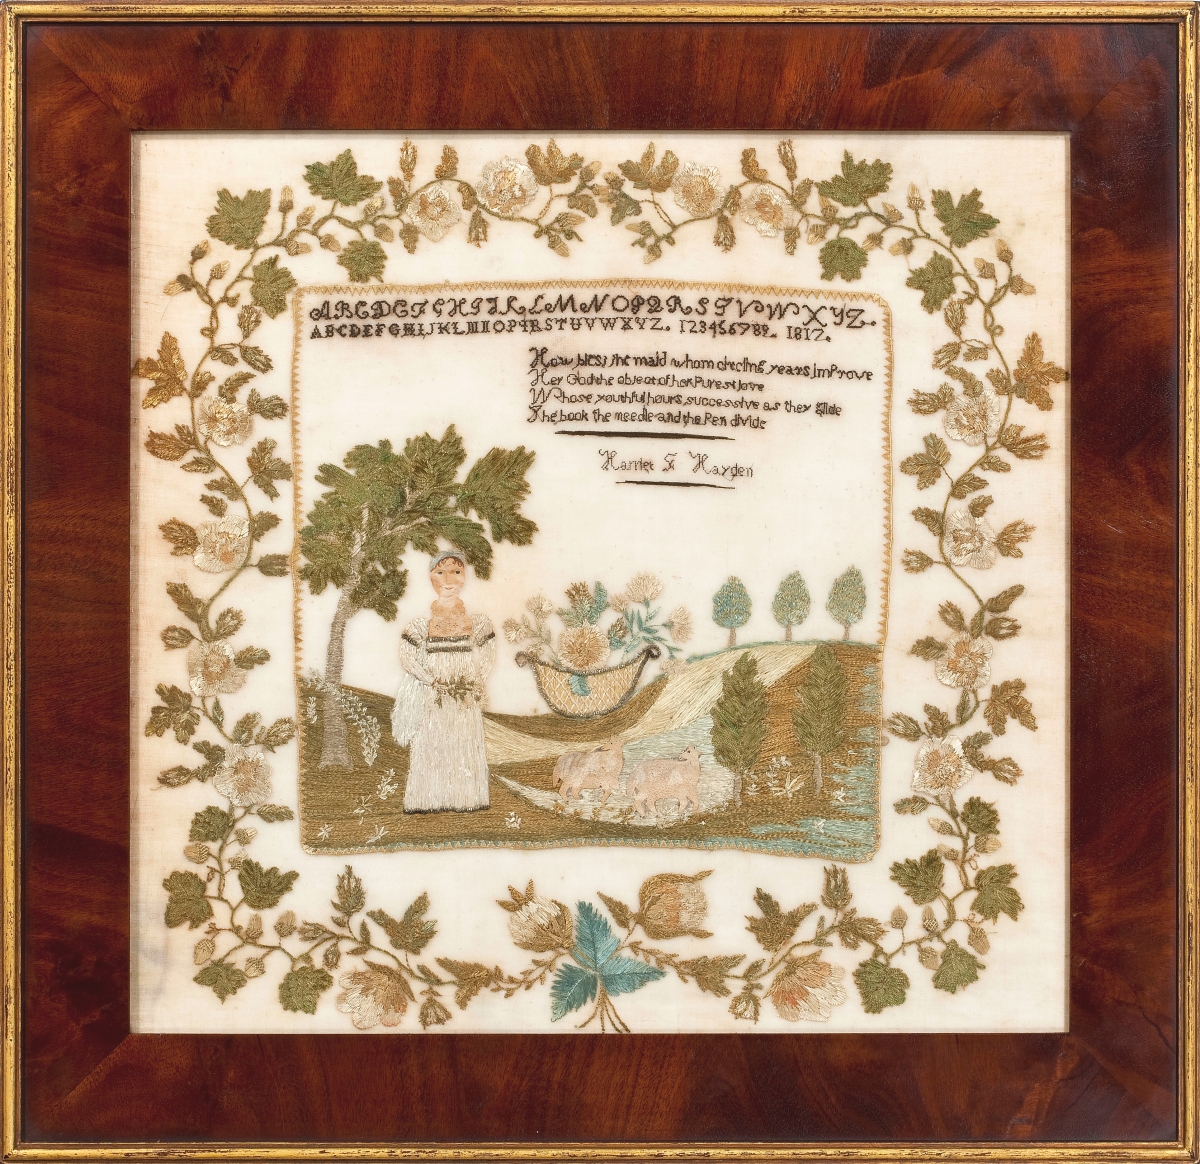 Harriet F. Hayden of Fitzwilliam, N.H., worked this sampler in 1817, which Amy Finkel said is one of several known pieces that form a small but highly significant group considered to rank highly within the finest of New Hampshire folk art. It was worked in silk and metallic coils with watercolor on paper, on fine linen gauze. M. Finkel & Daughter, Philadelphia, Penn.